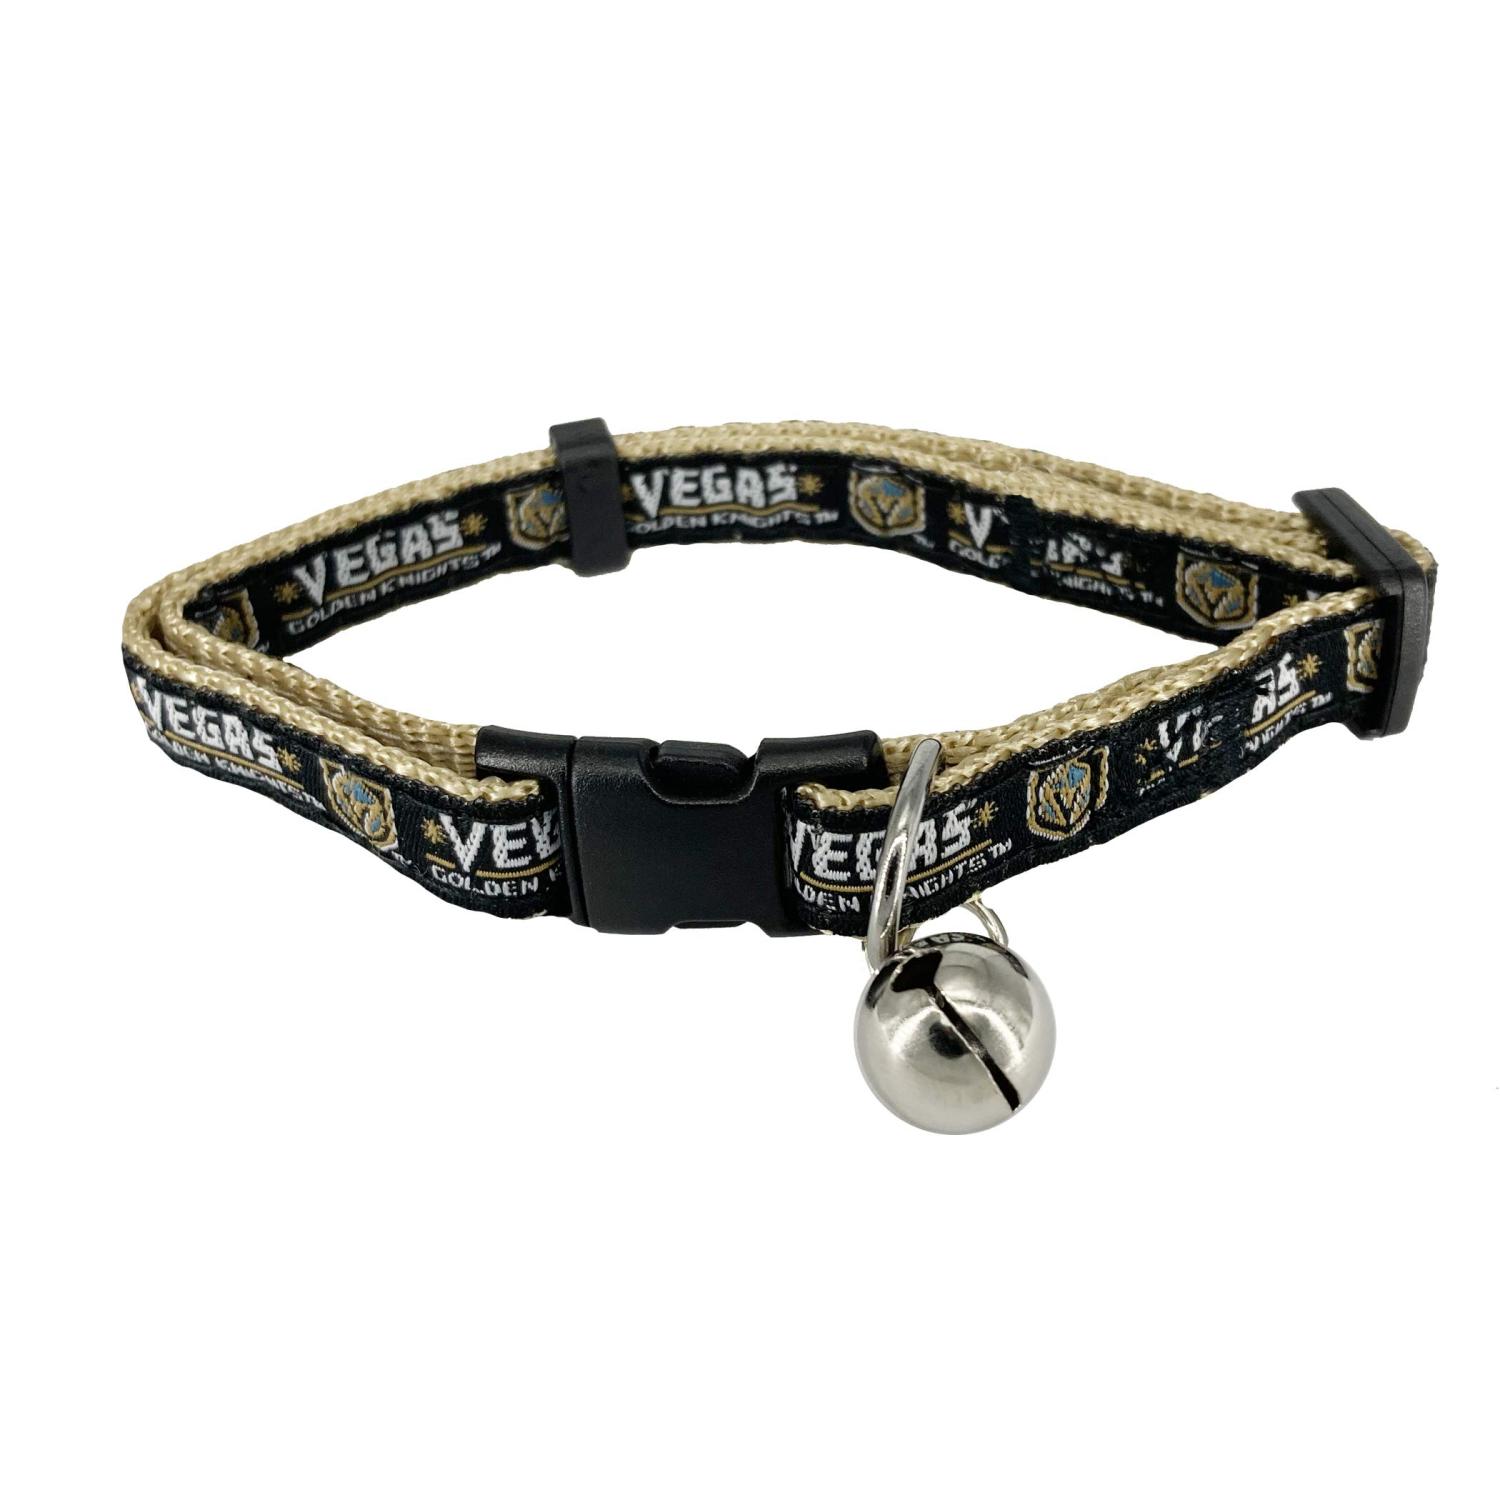 Pets First NHL Pittsburgh Penguins Collar for Dogs & Cats, Small. -  Adjustable, Cute & Stylish! The Ultimate Hockey Fan Collar! Small PITTSBURGH  PENGUINS